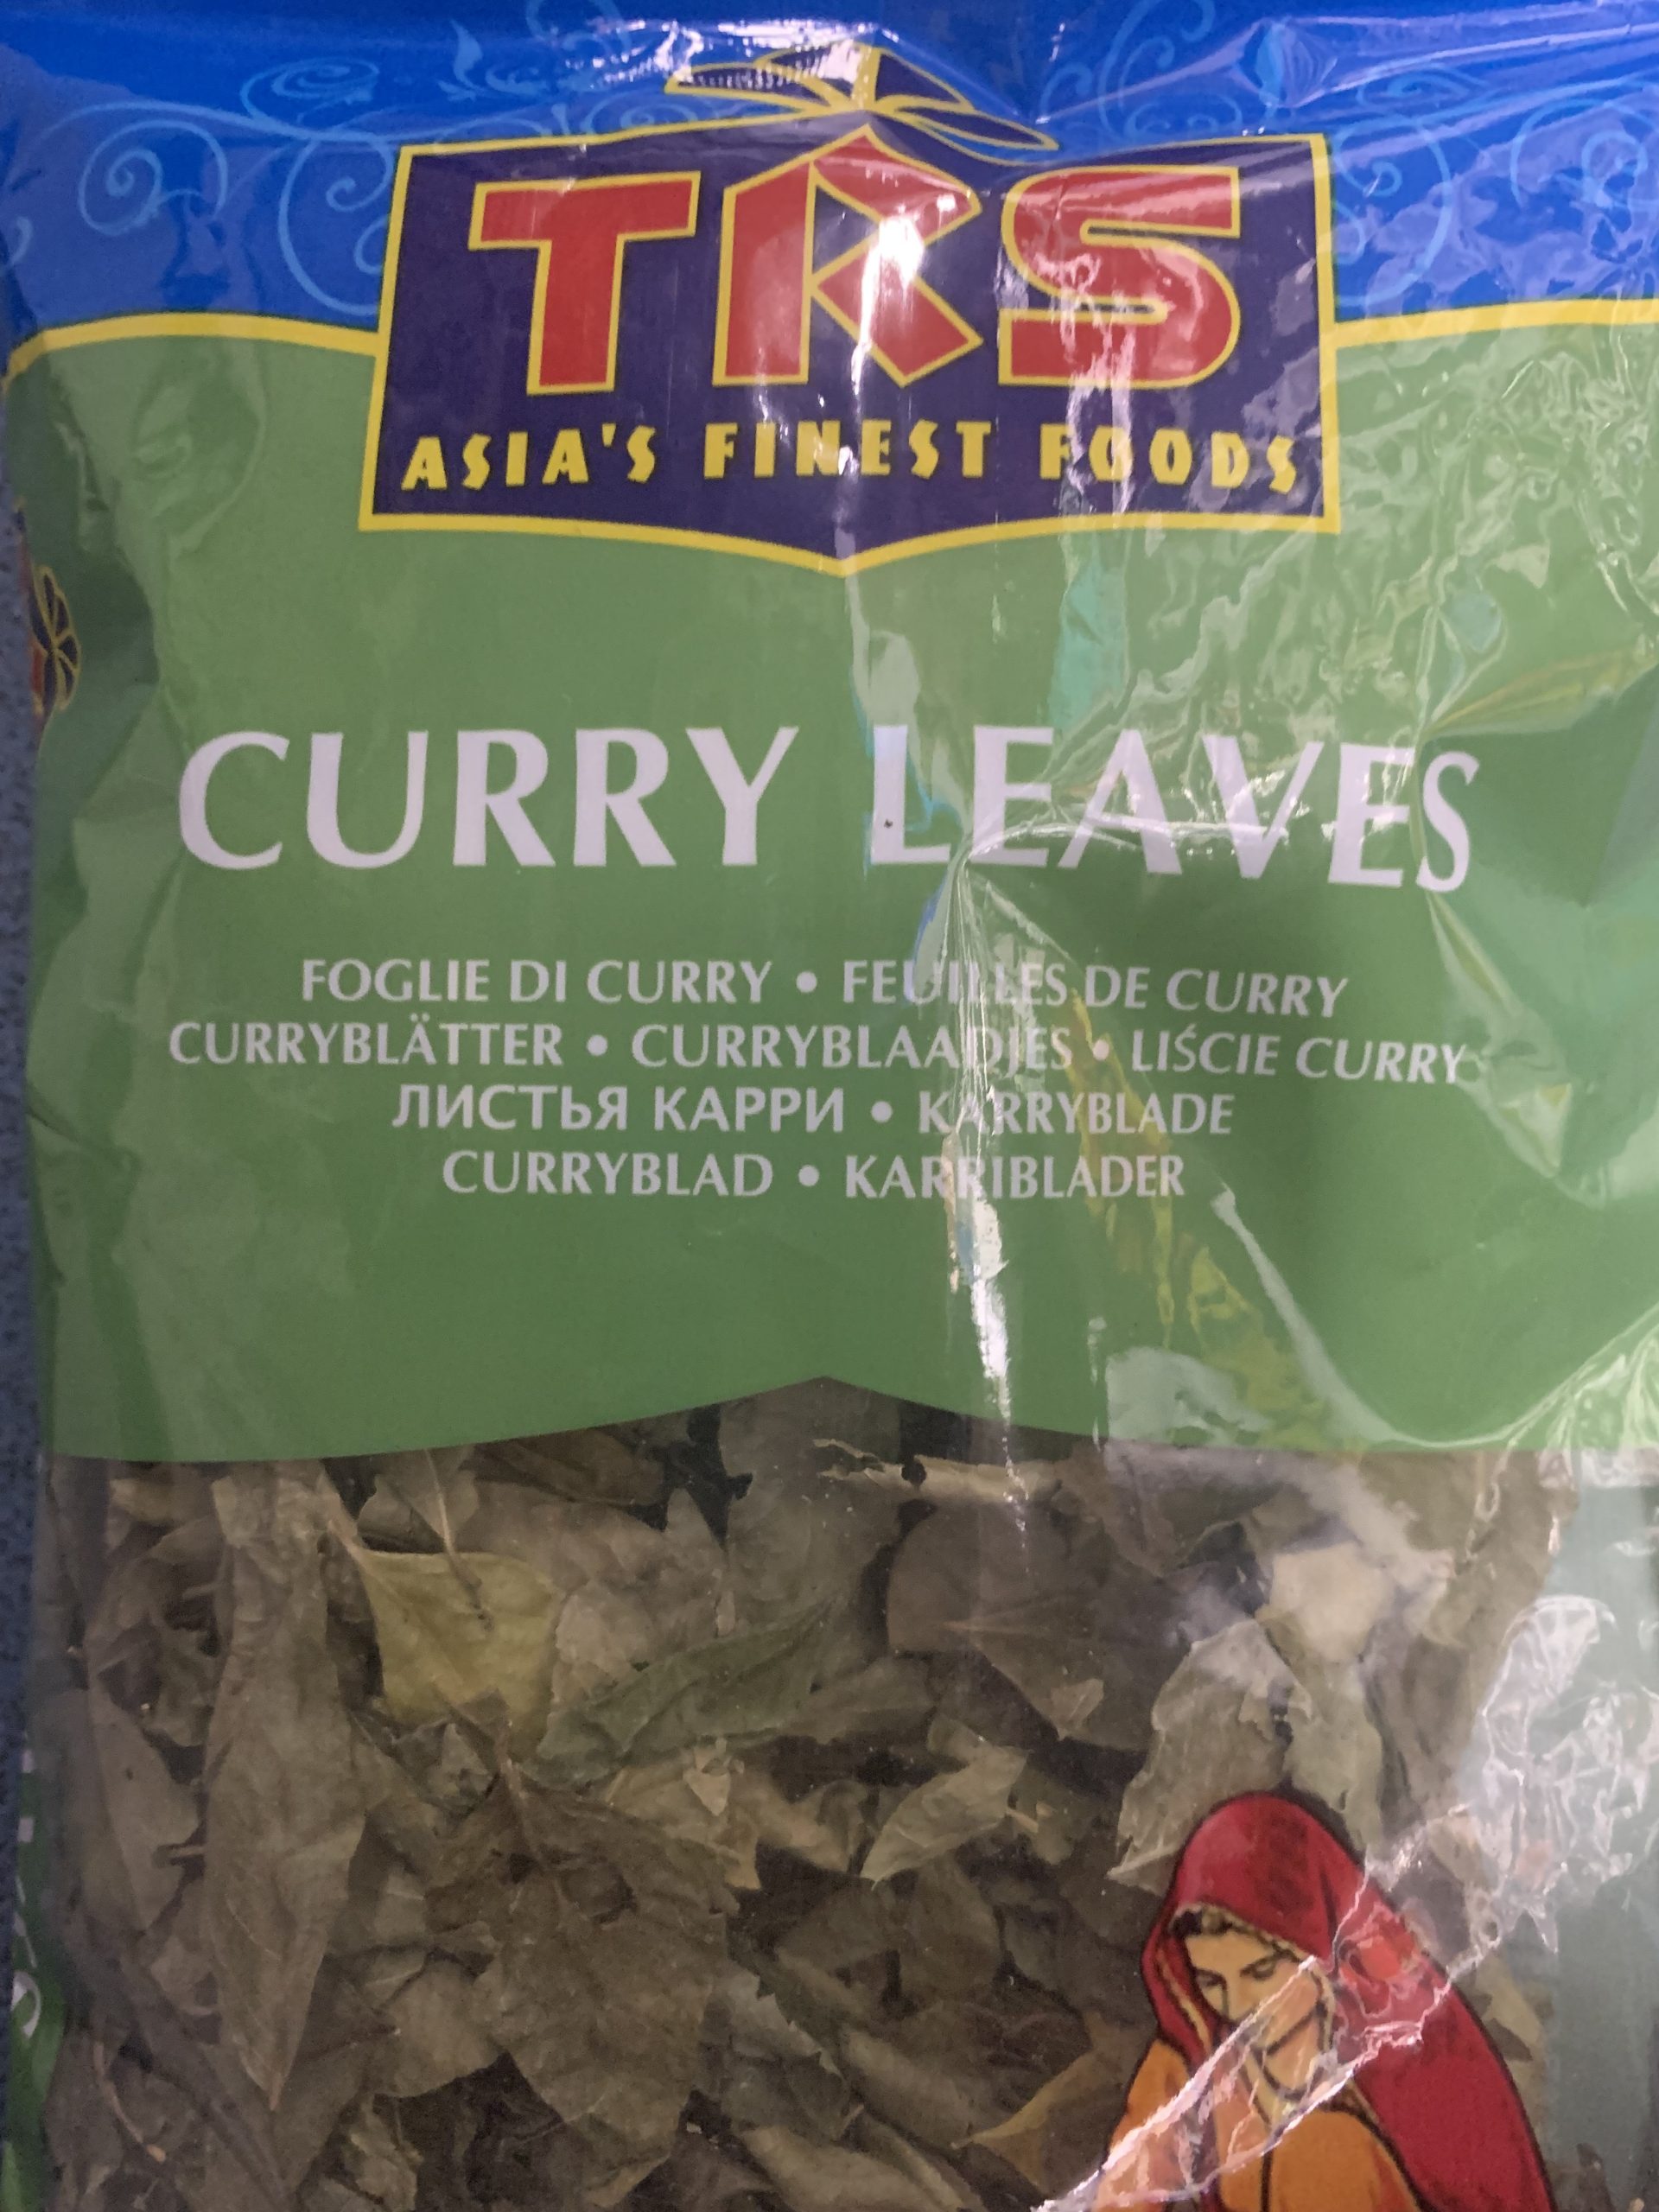 TRS Dried Curry Leaves 30g